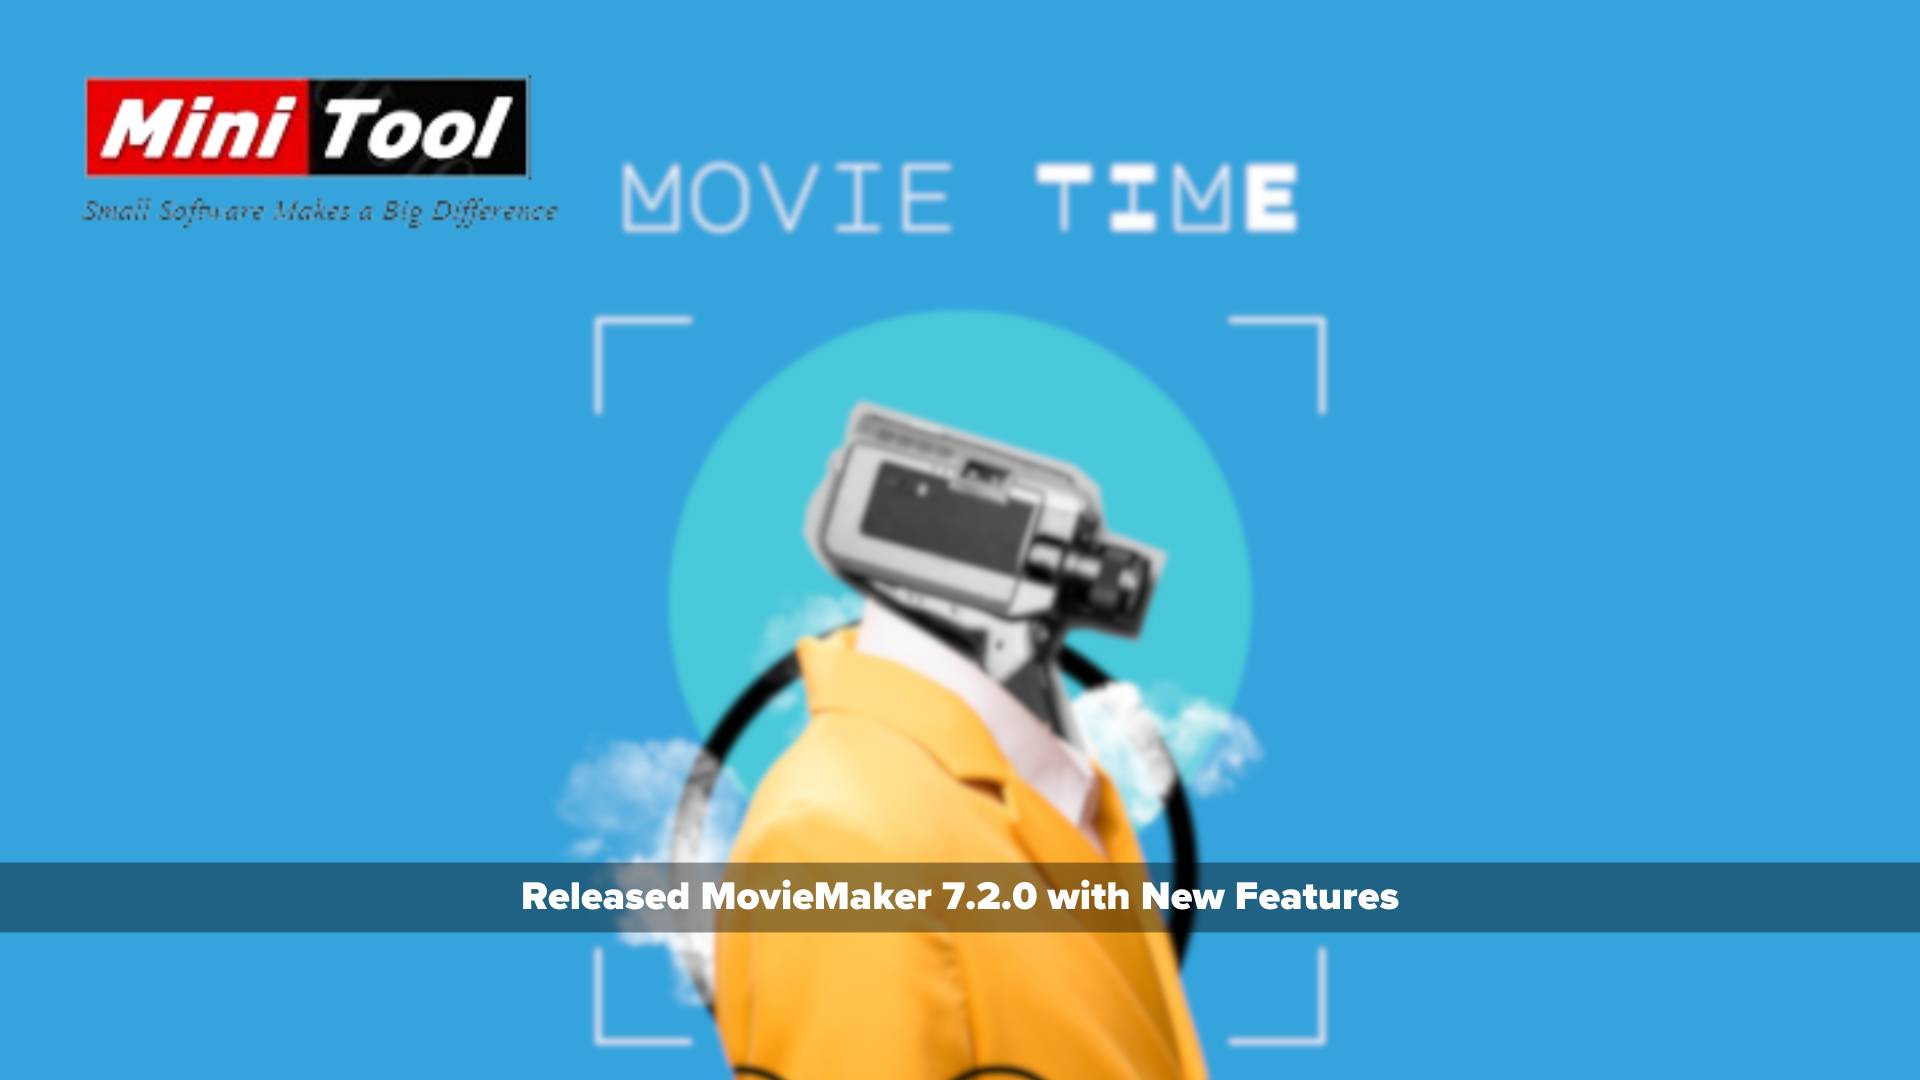 MiniTool Released MovieMaker 7.2.0 with New Features